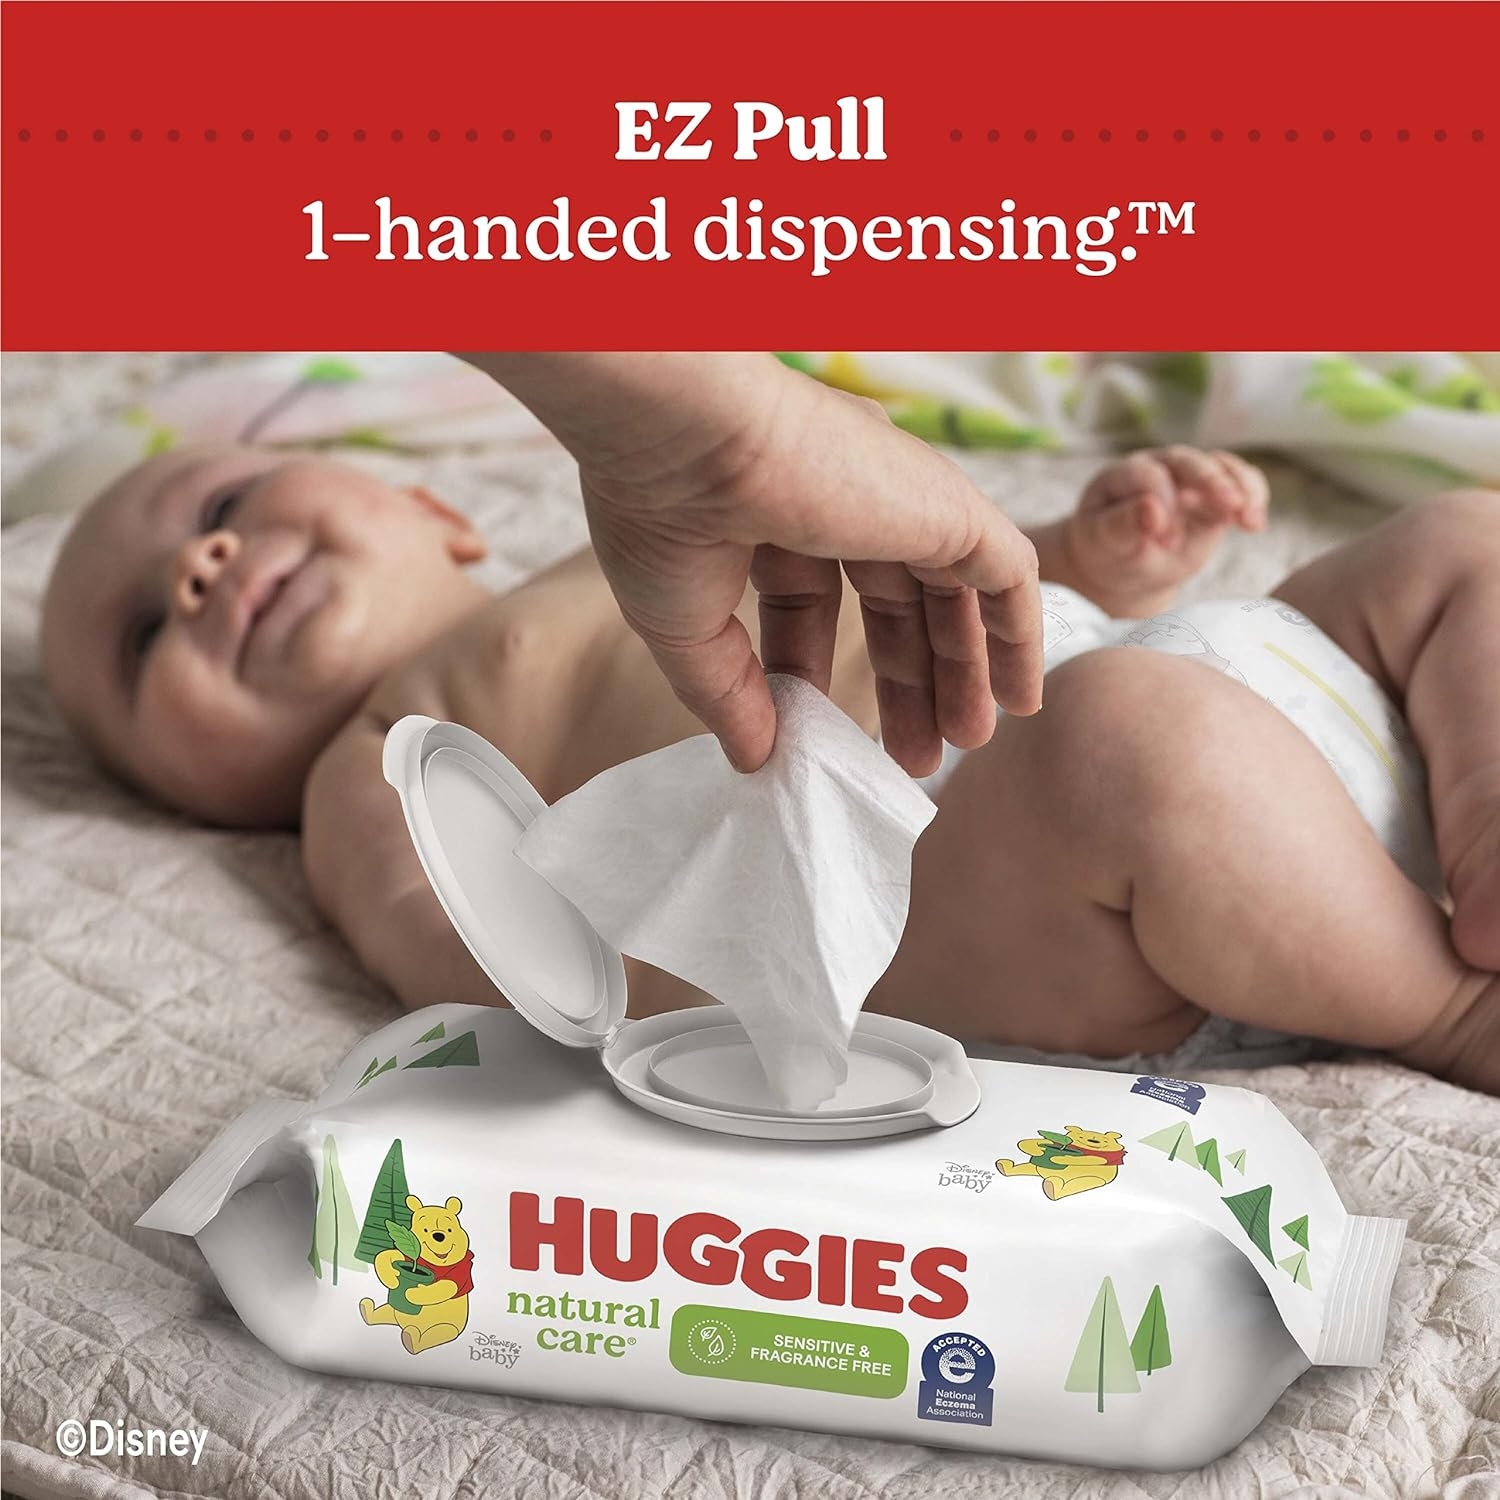 Baby Wipes, Huggies Natural Care Sensitive Baby Diaper Wipes, Unscented, Hypoallergenic, 8 Flip-Top Packs (448 Wipes Total)